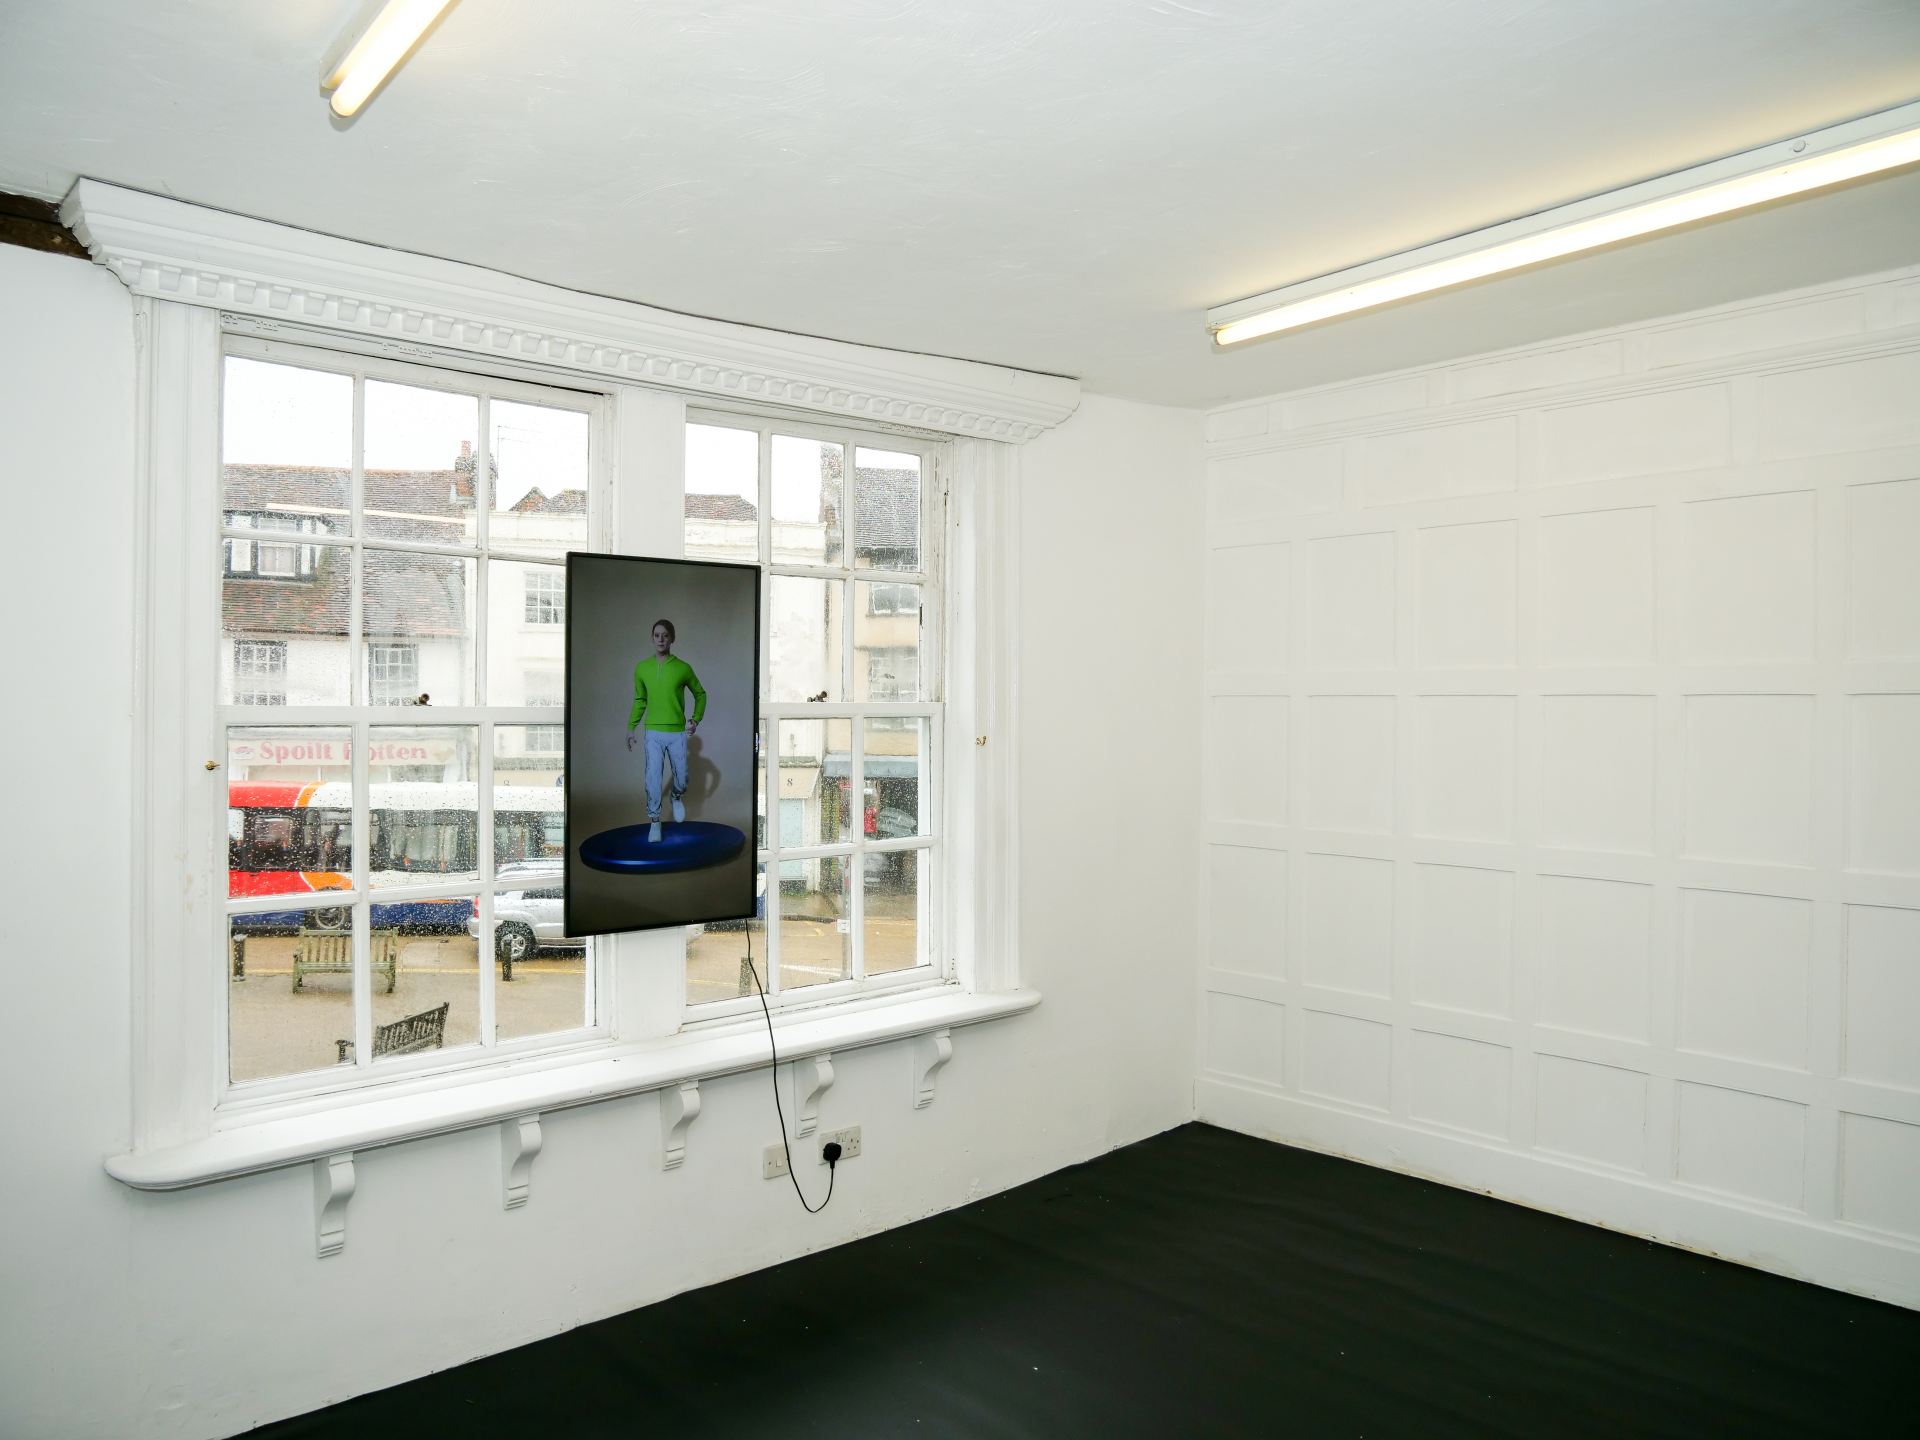 An image of an installation with a screen in a white room.